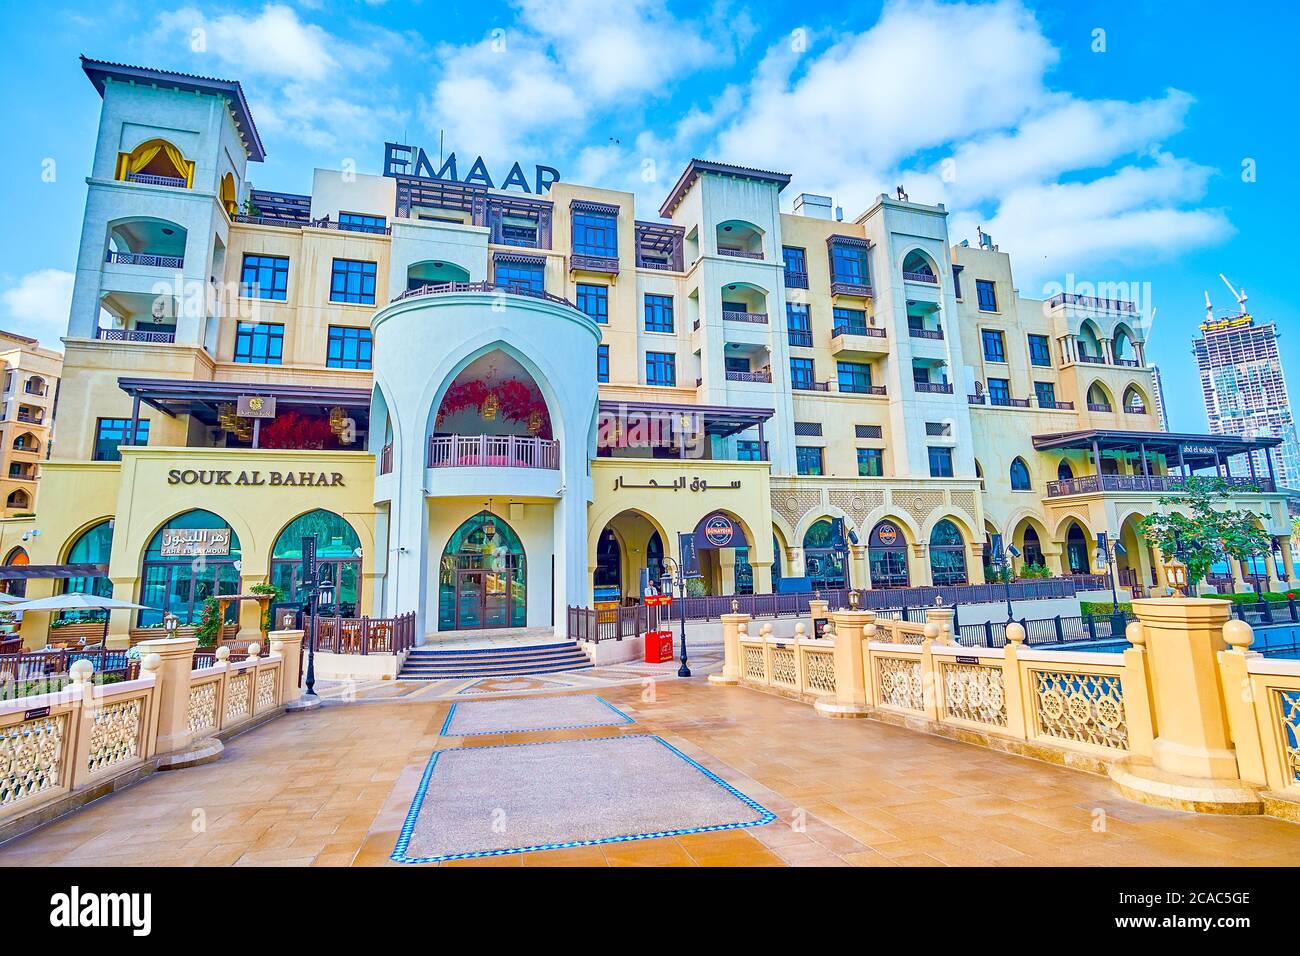 DUBAI, UAE - MARCH 3, 2020: Al Bahar Souq (market) is the modern shopping mall in the heart of Downtown district and made in Arabic style with traditi Stock Photo